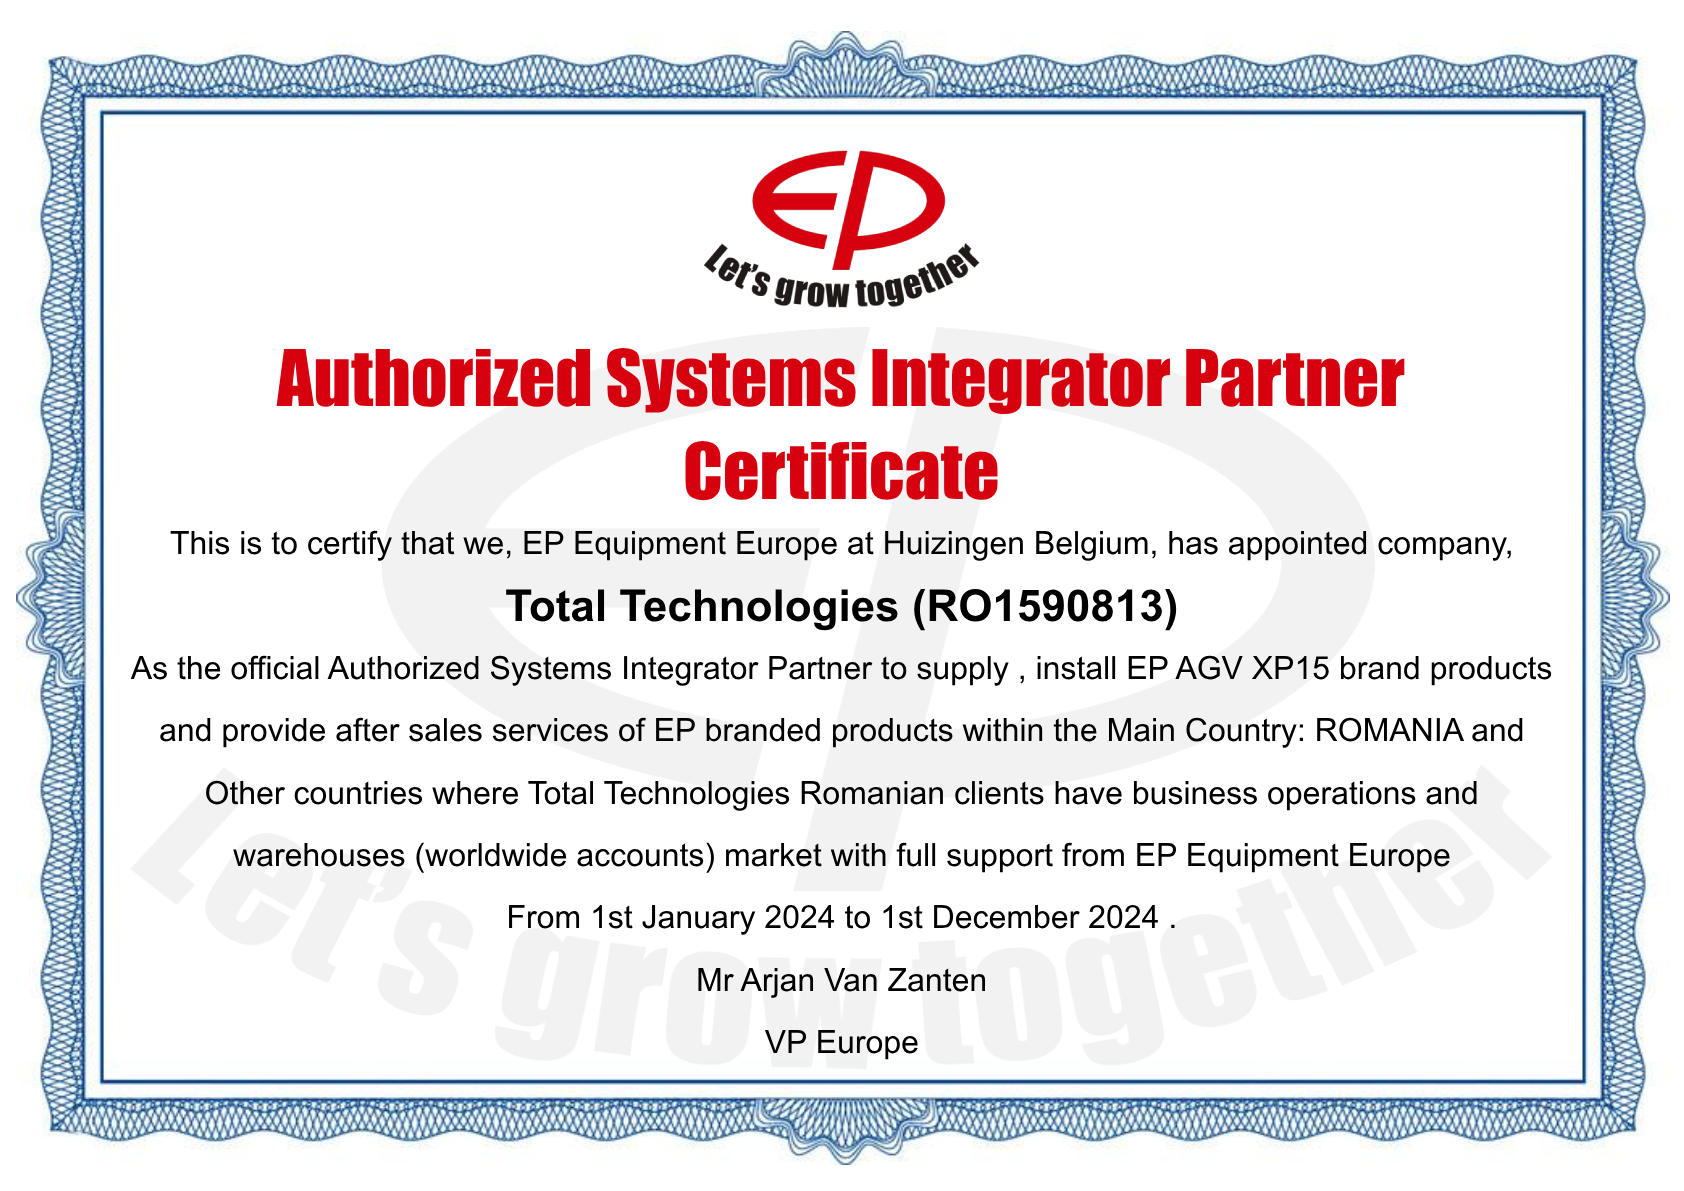 TOTAL TECHNOLOGIES Authorized Systems Integrator Partner Certificate 2024-pdf